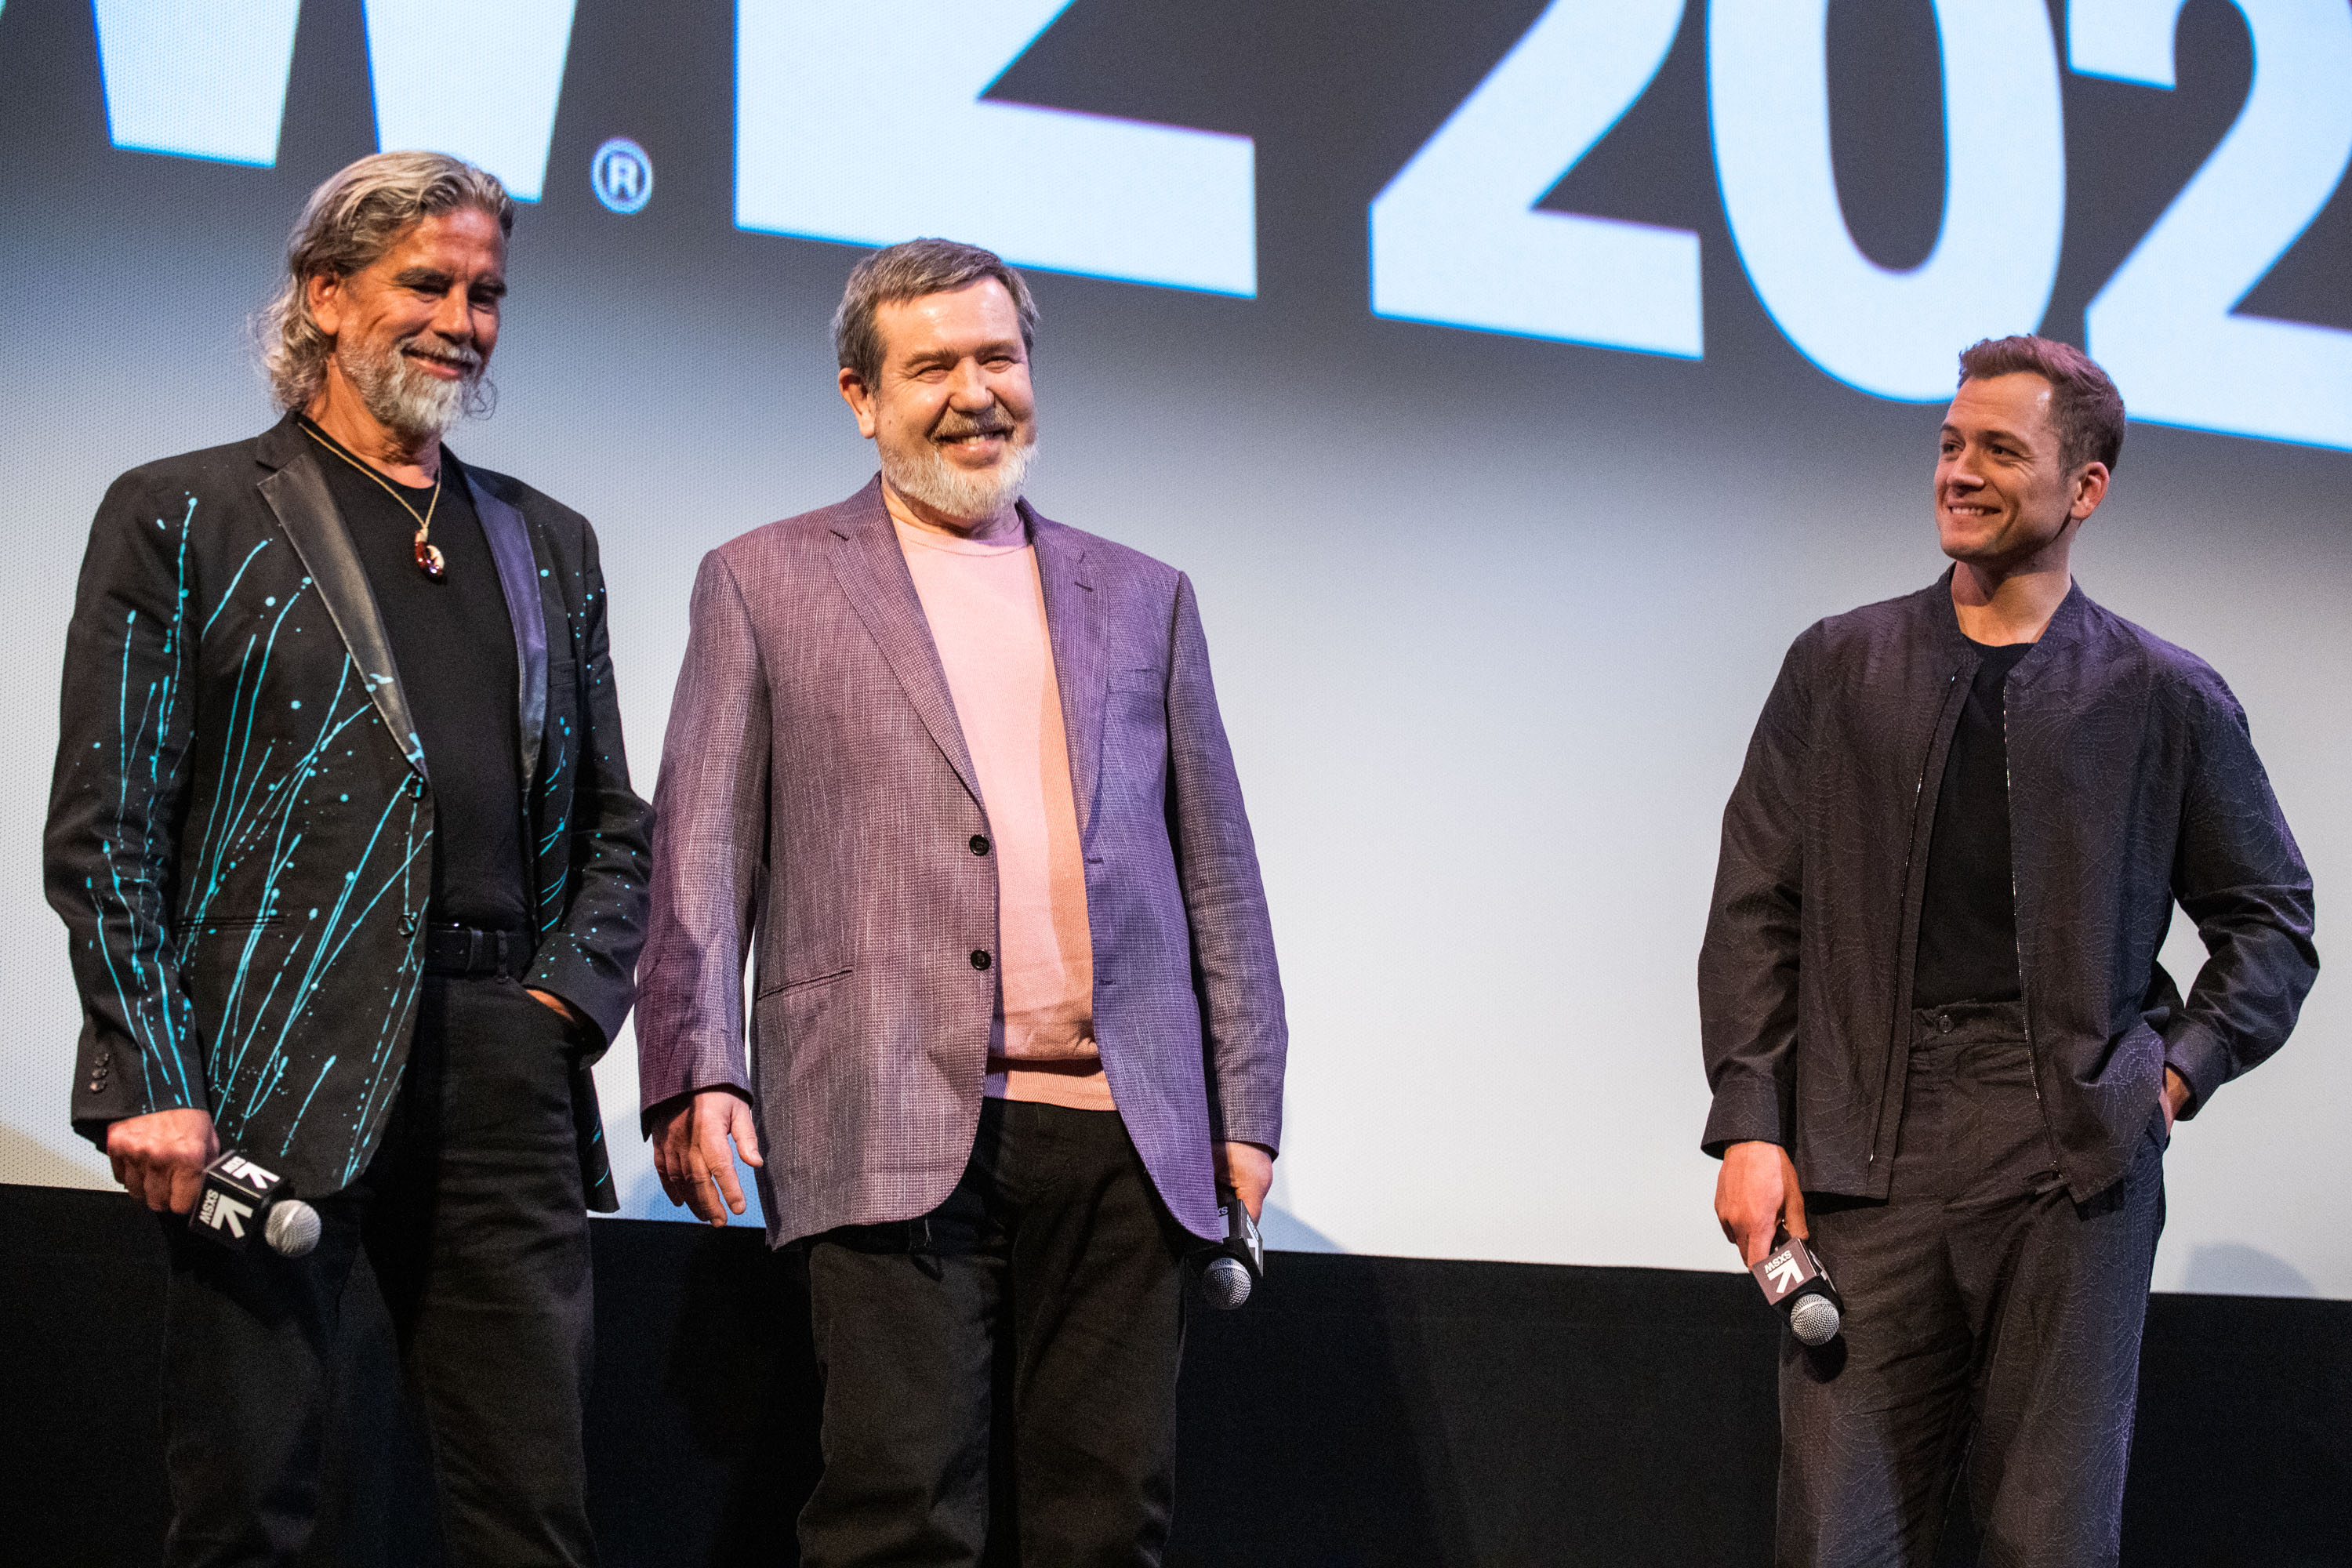 Henk Rogers, tanned with long silver hair, and Alexey Pajitnov, with a white beard, stand next to each other smiling and wearing flashy jackets over plain T-shirts.